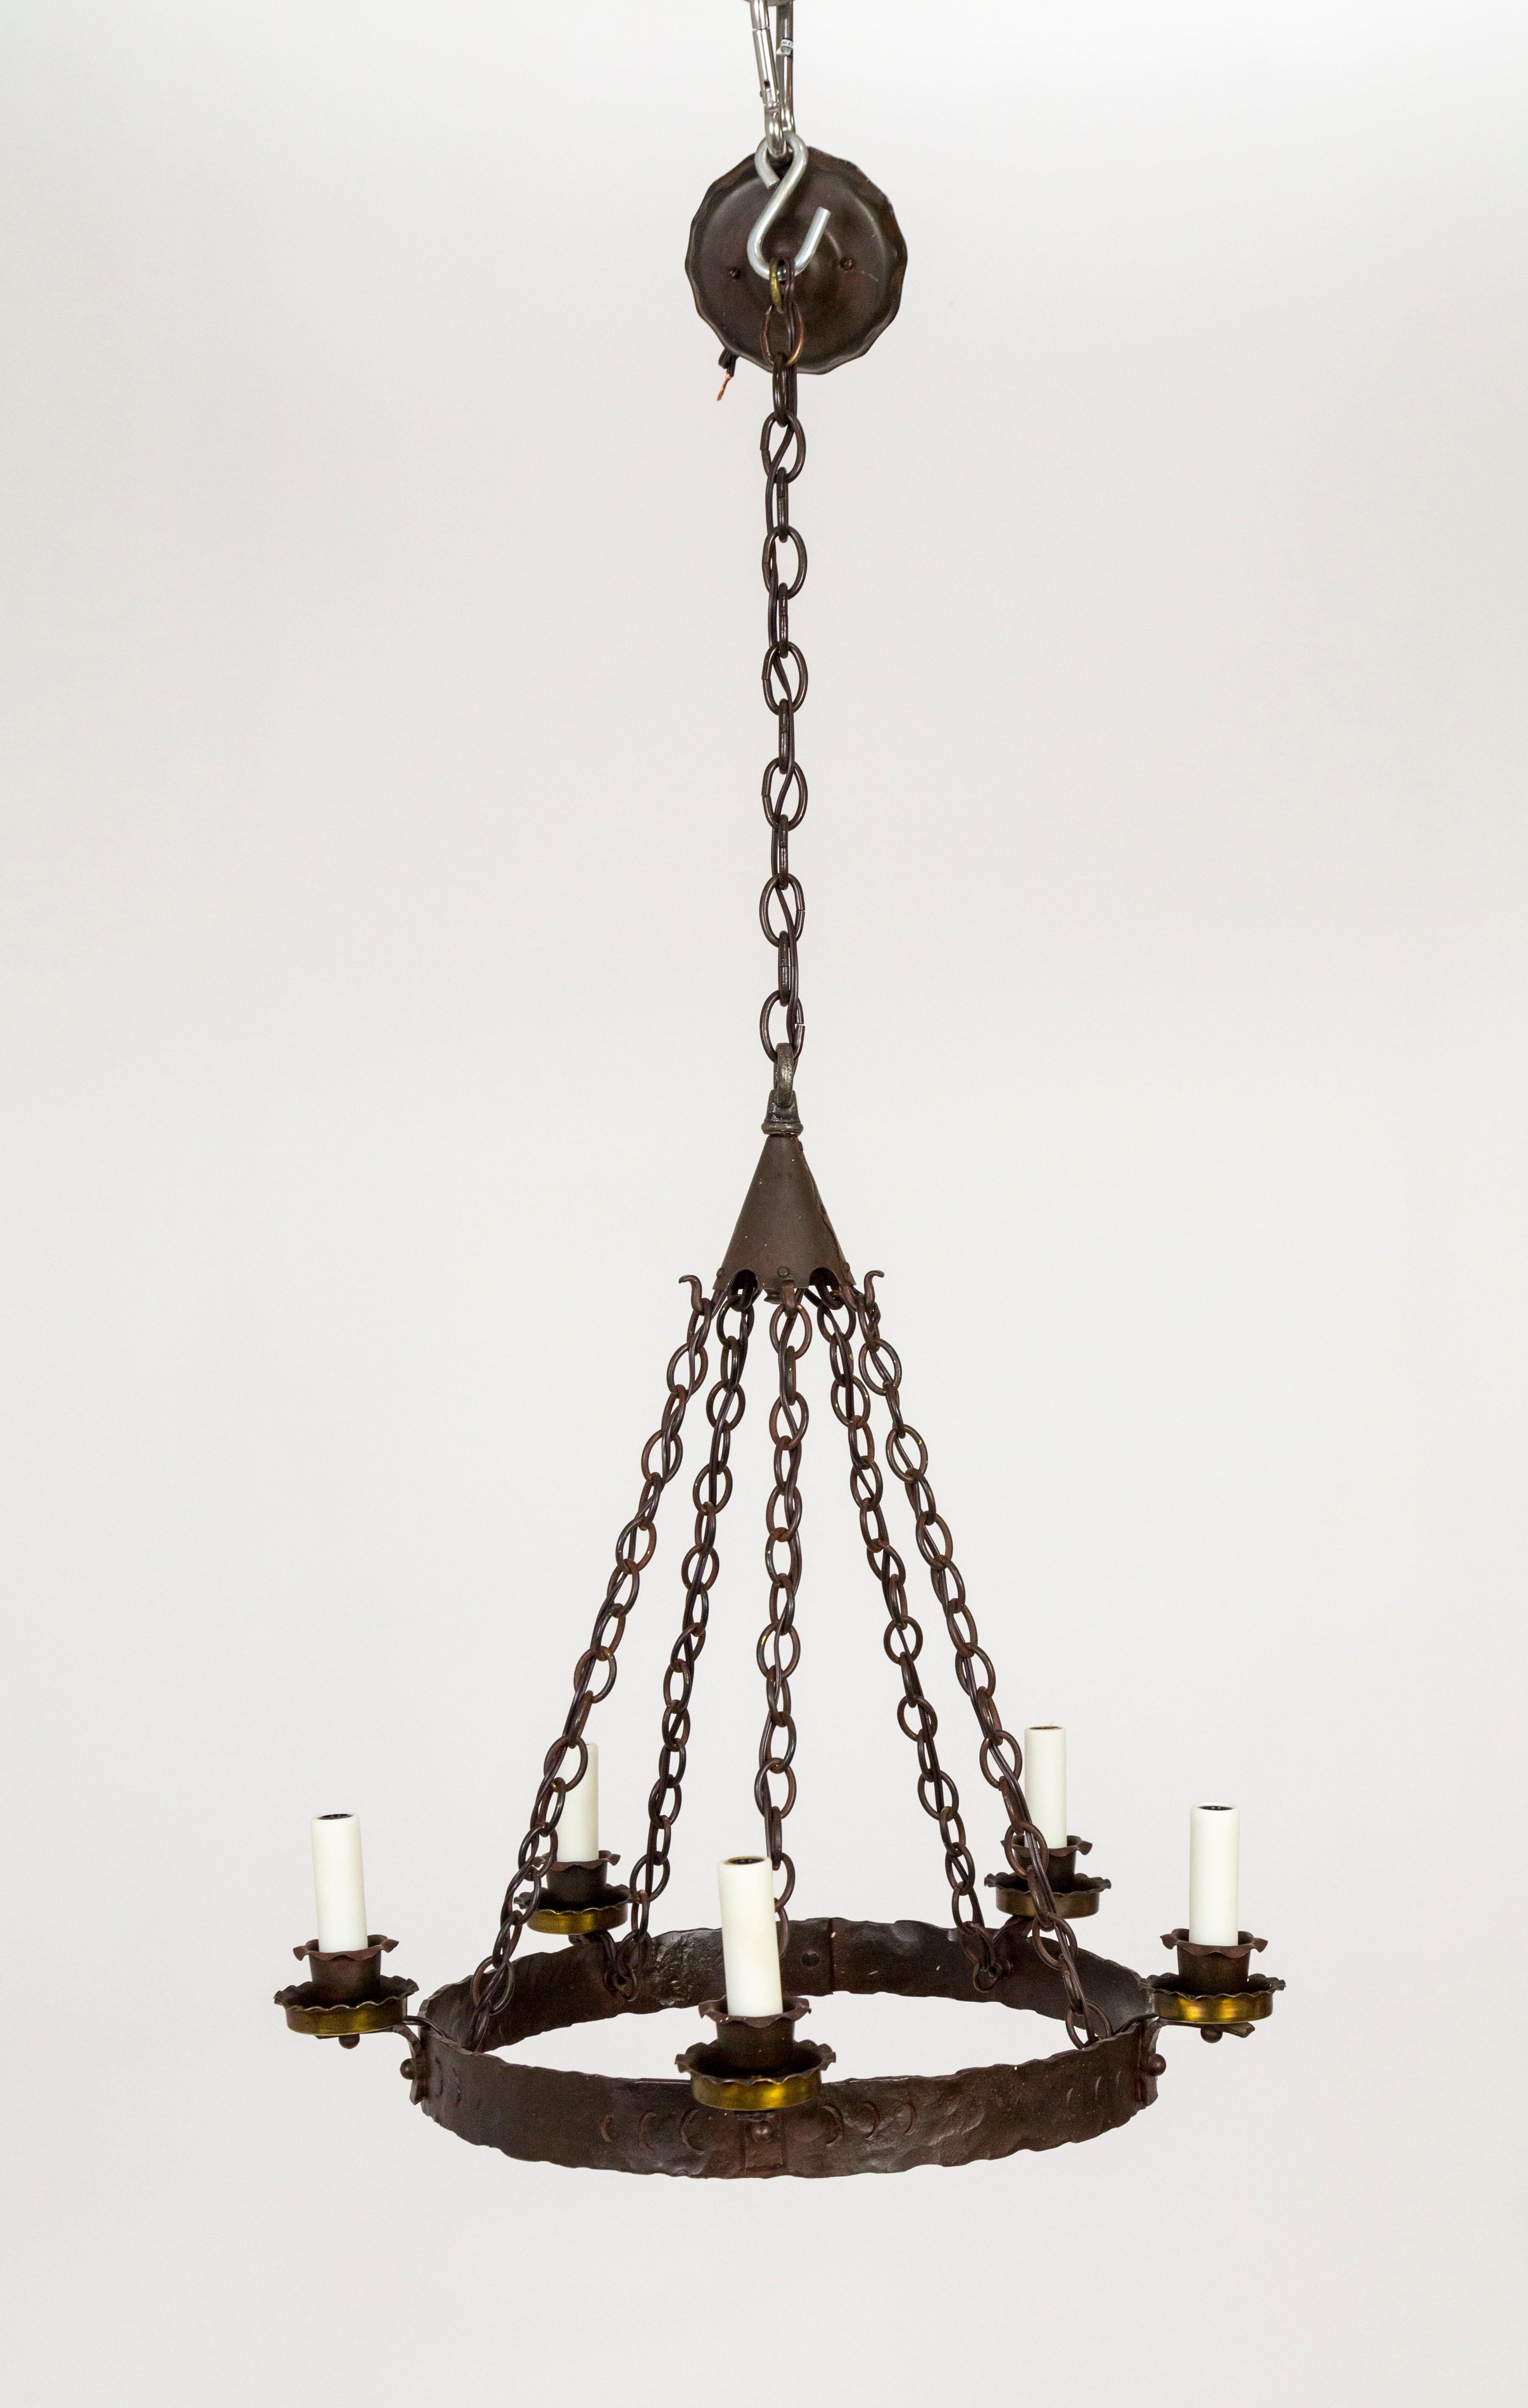 medieval style chandelier